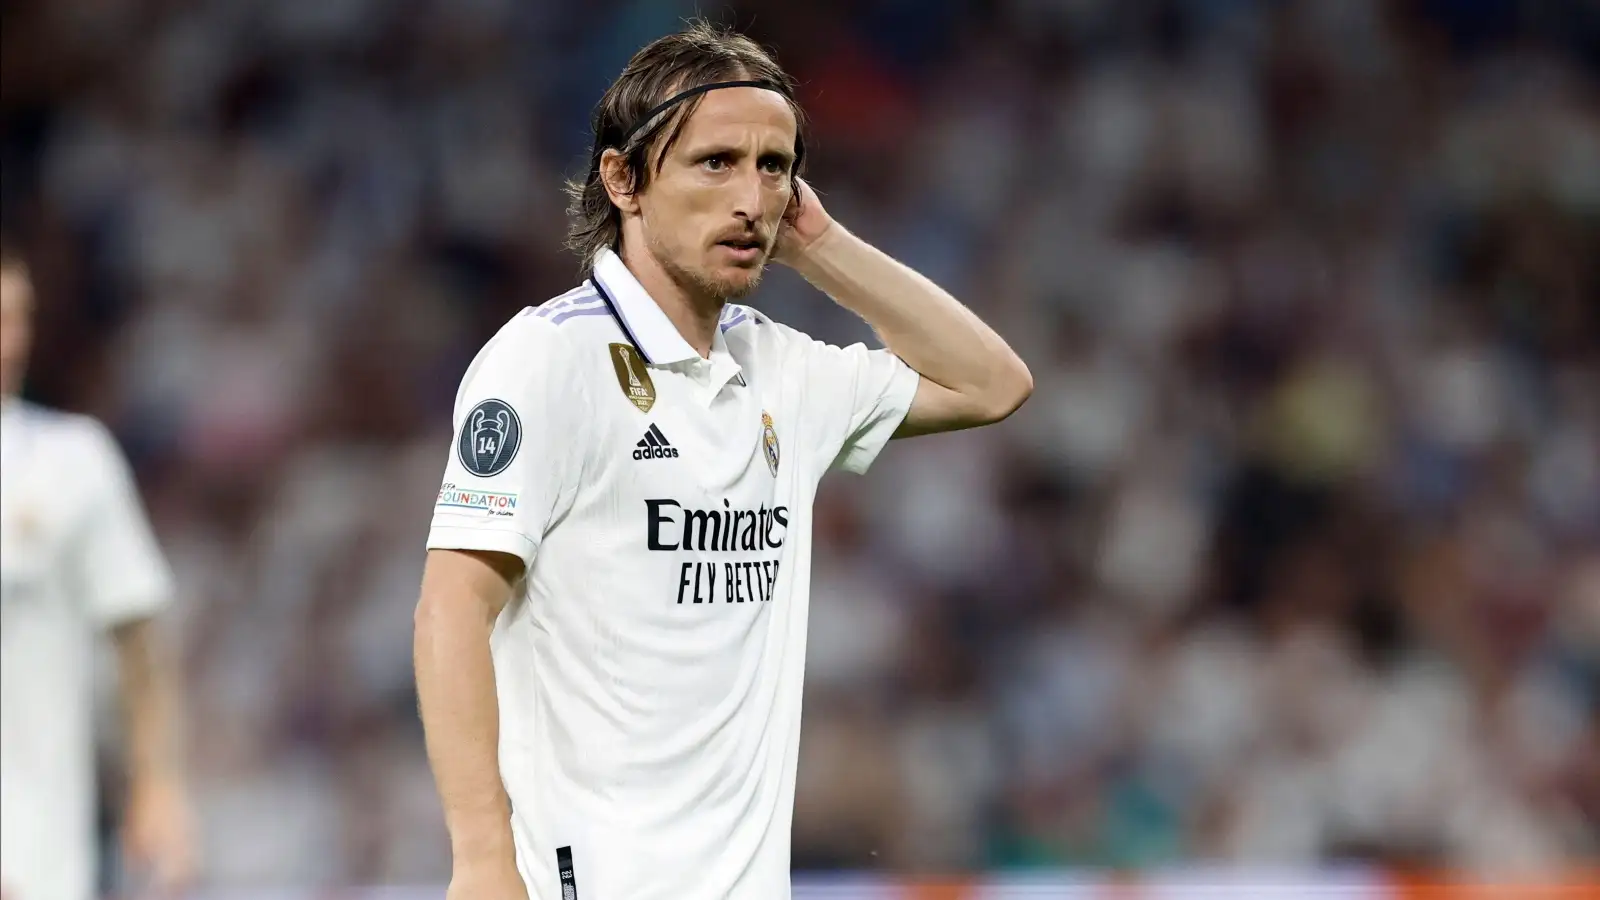 Luka Modric’s heavenly first touch for Real Madrid was enough to prove God’s existence